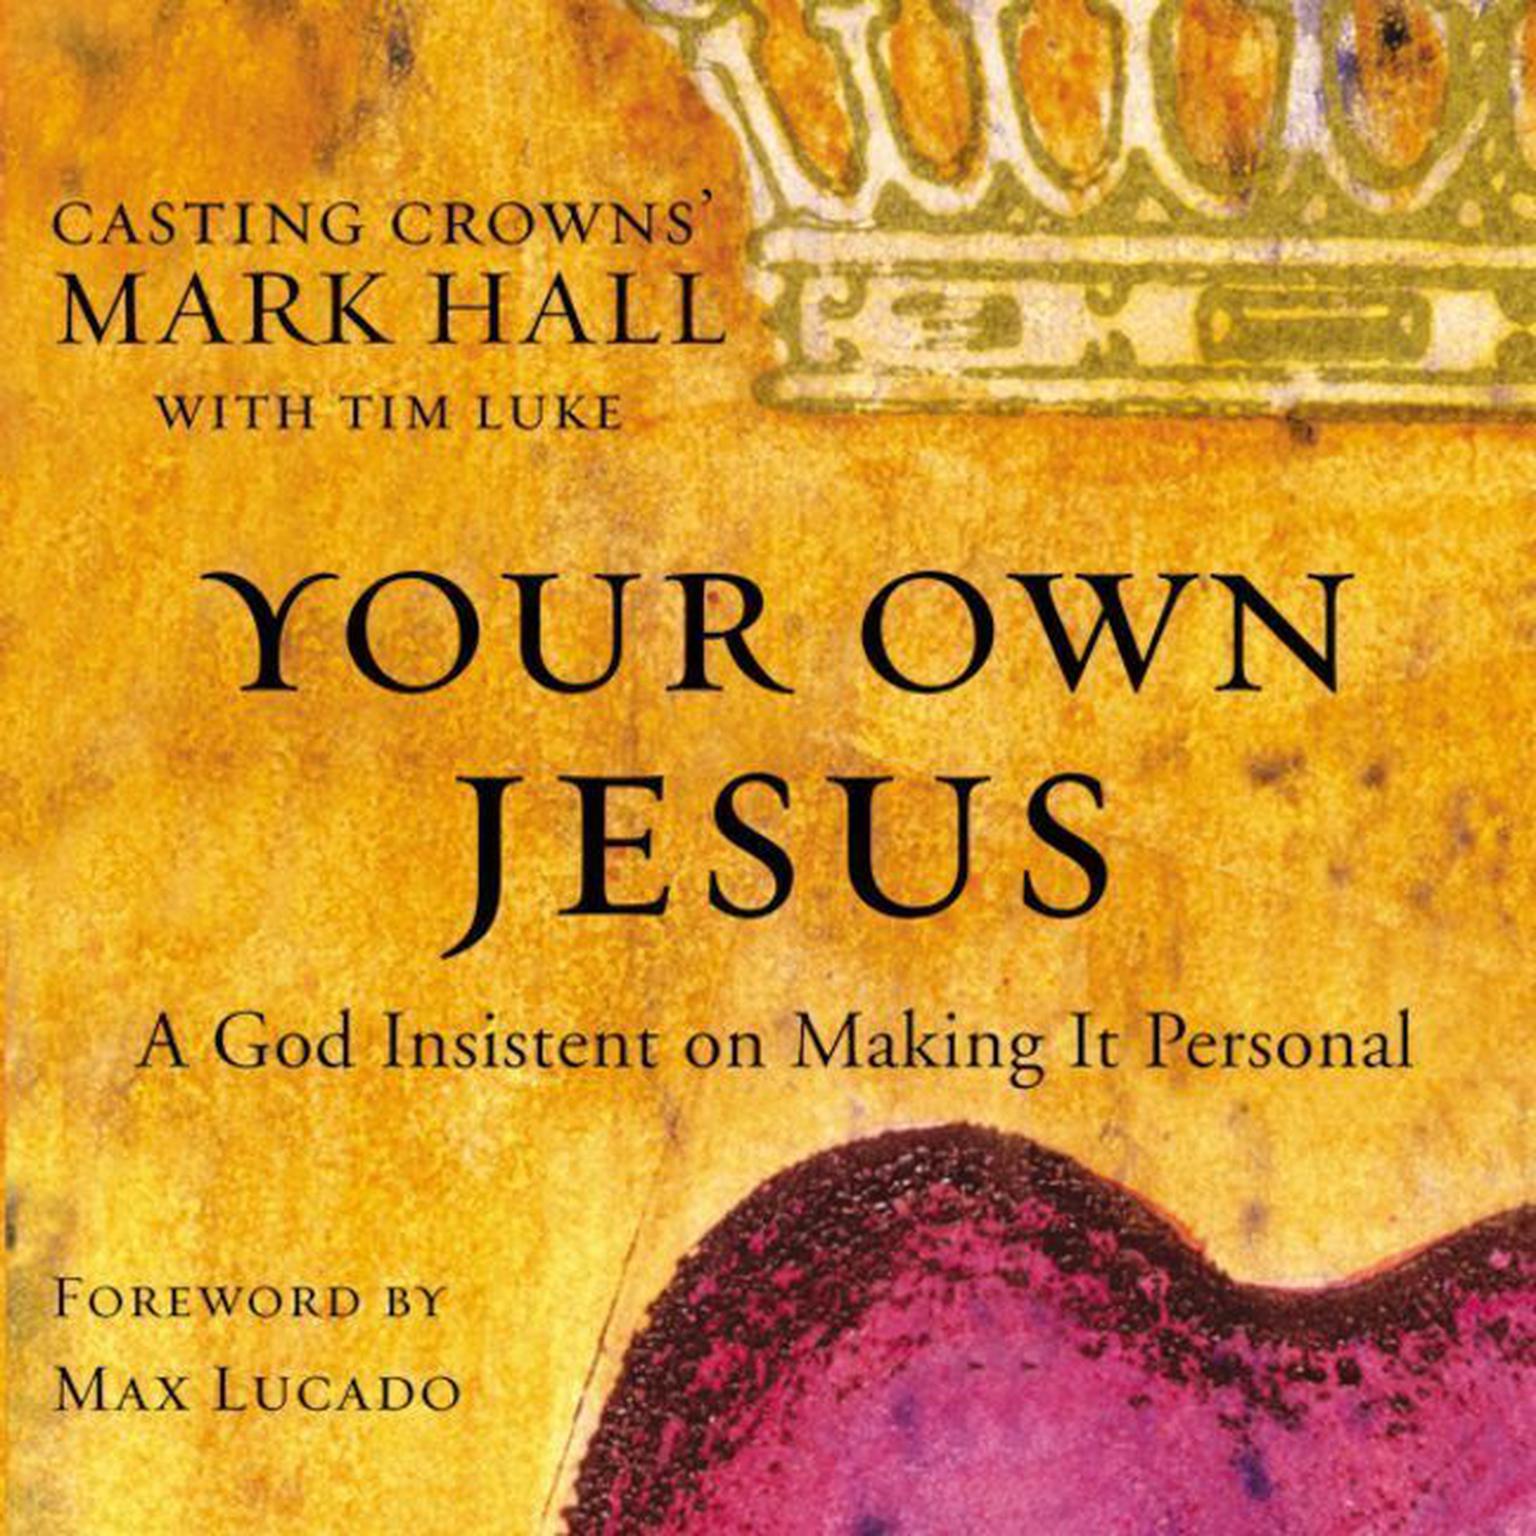 Your Own Jesus: A God Insistent on Making It Personal Audiobook, by Mark Hall